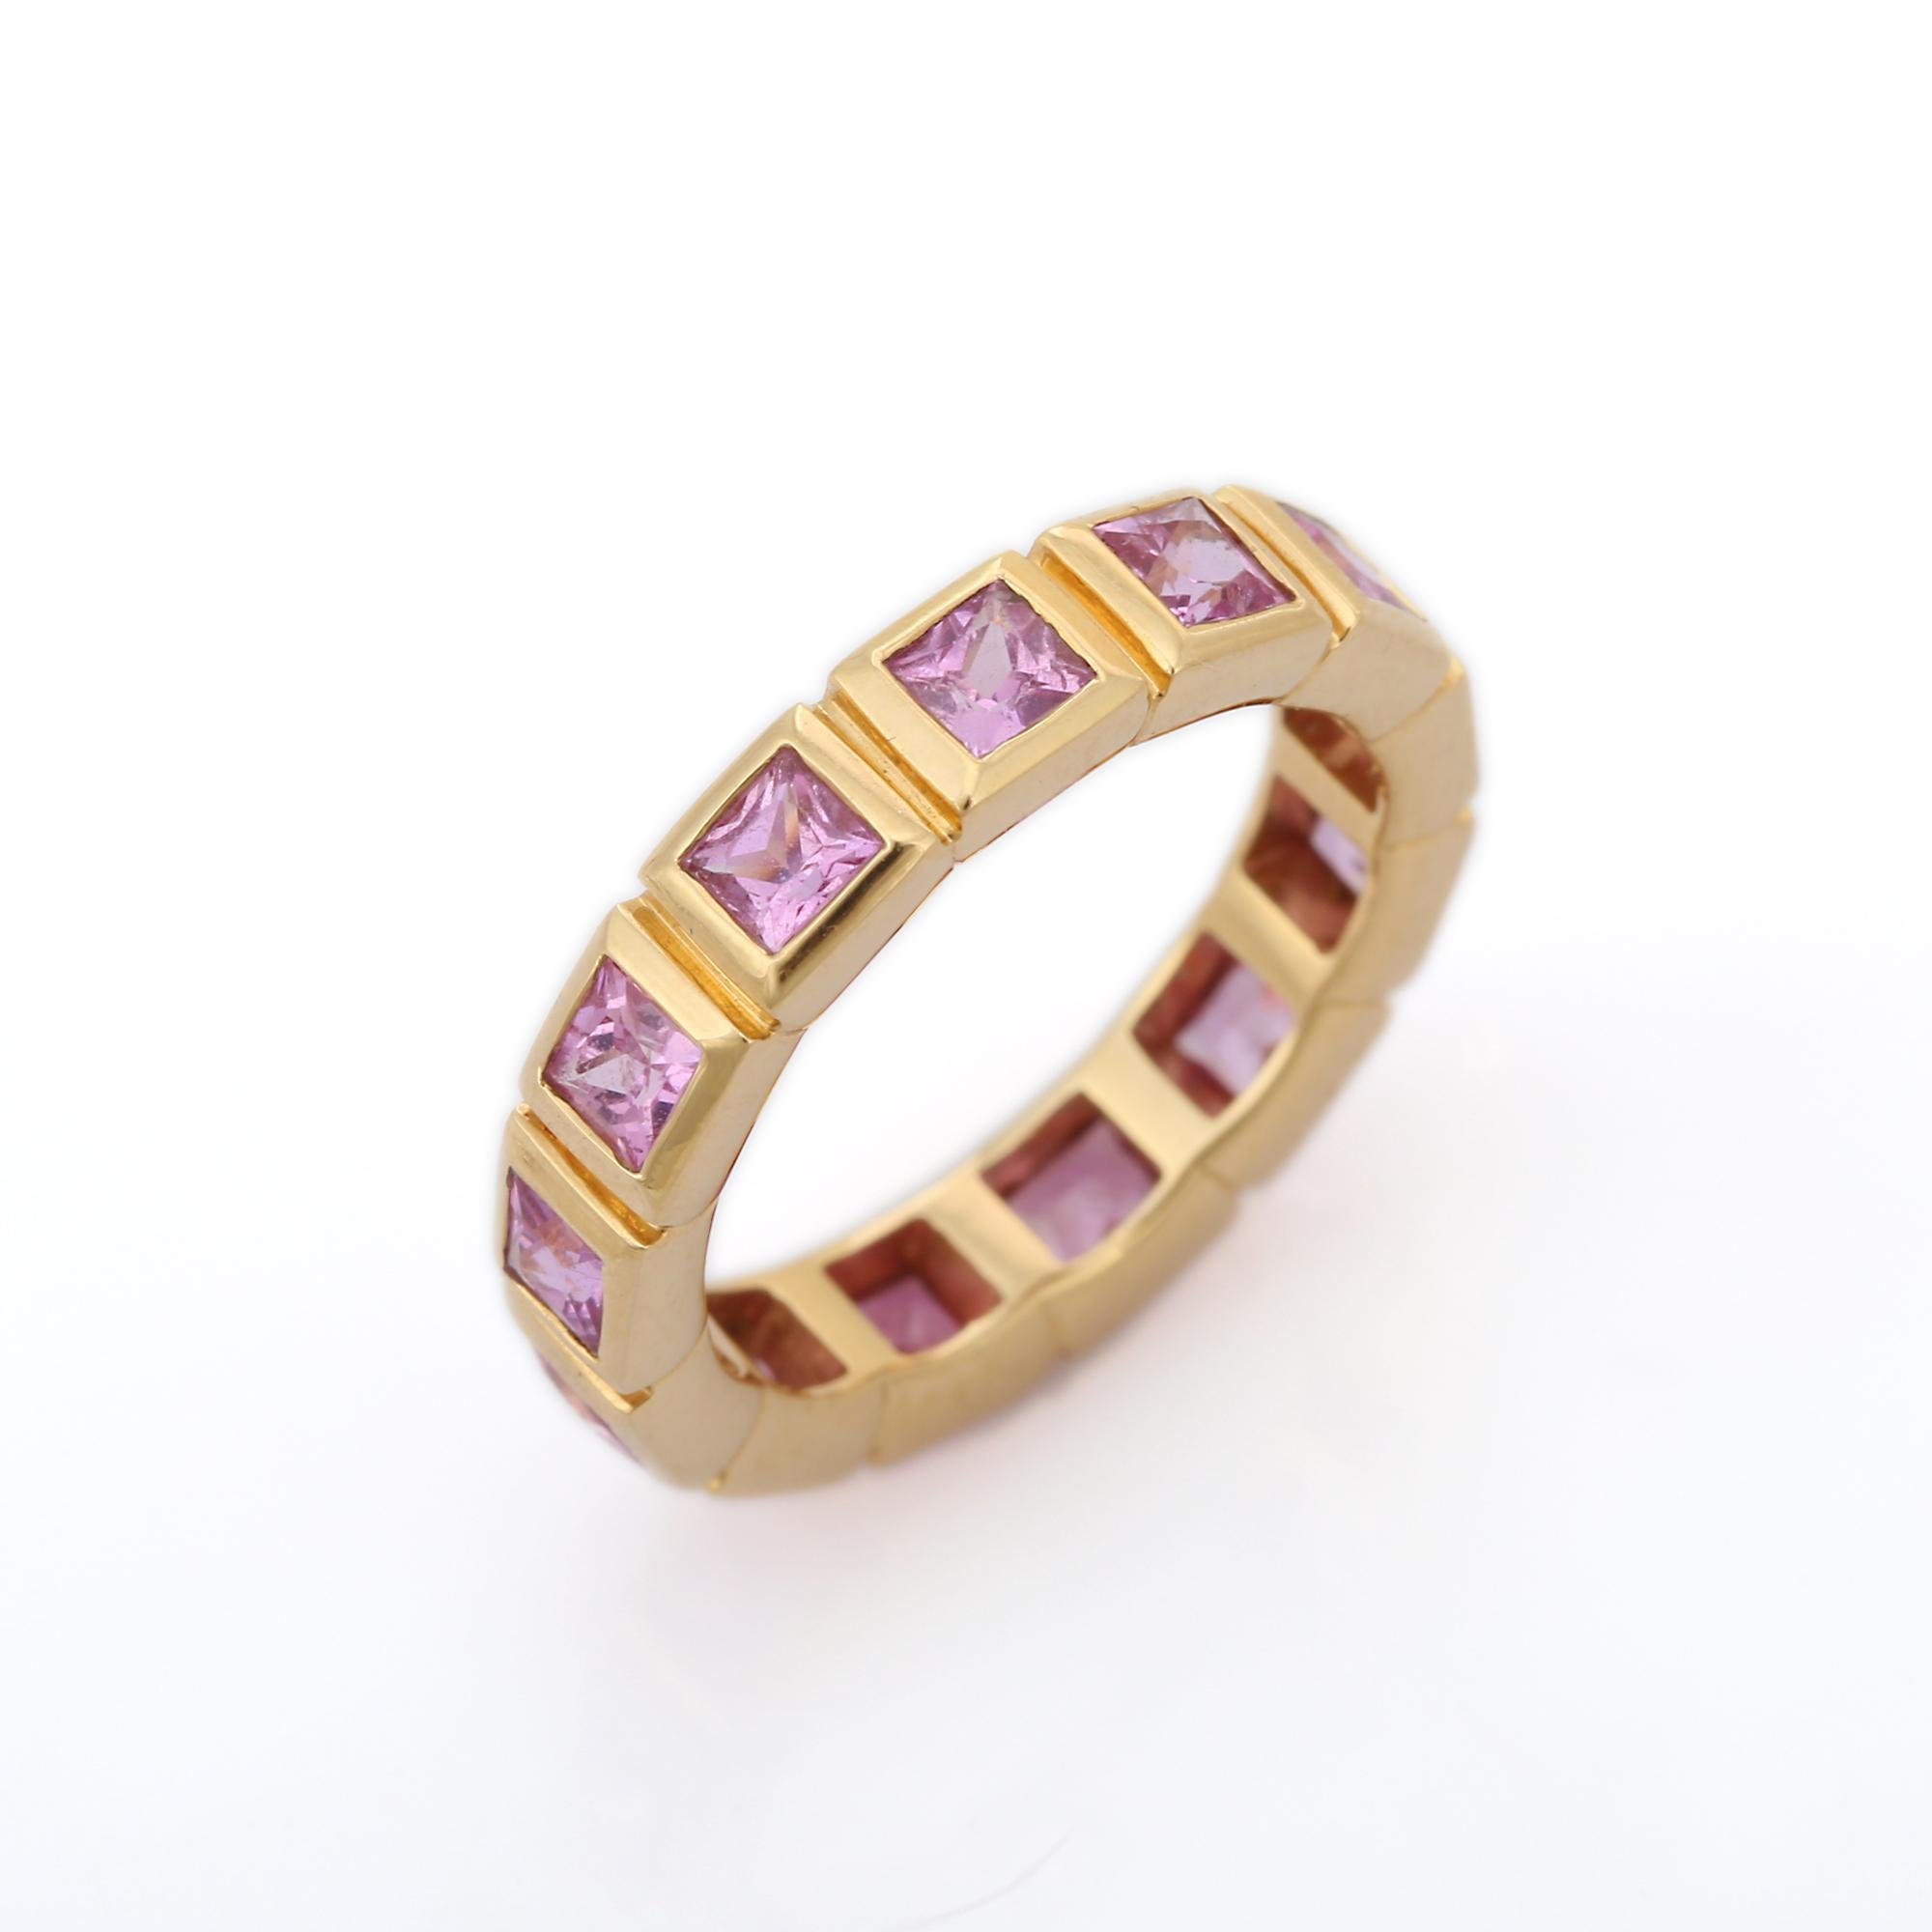 For Sale:  2.48 Carat Pink Sapphire Square Cut Eternity Band Ring in 18K Yellow Gold 3